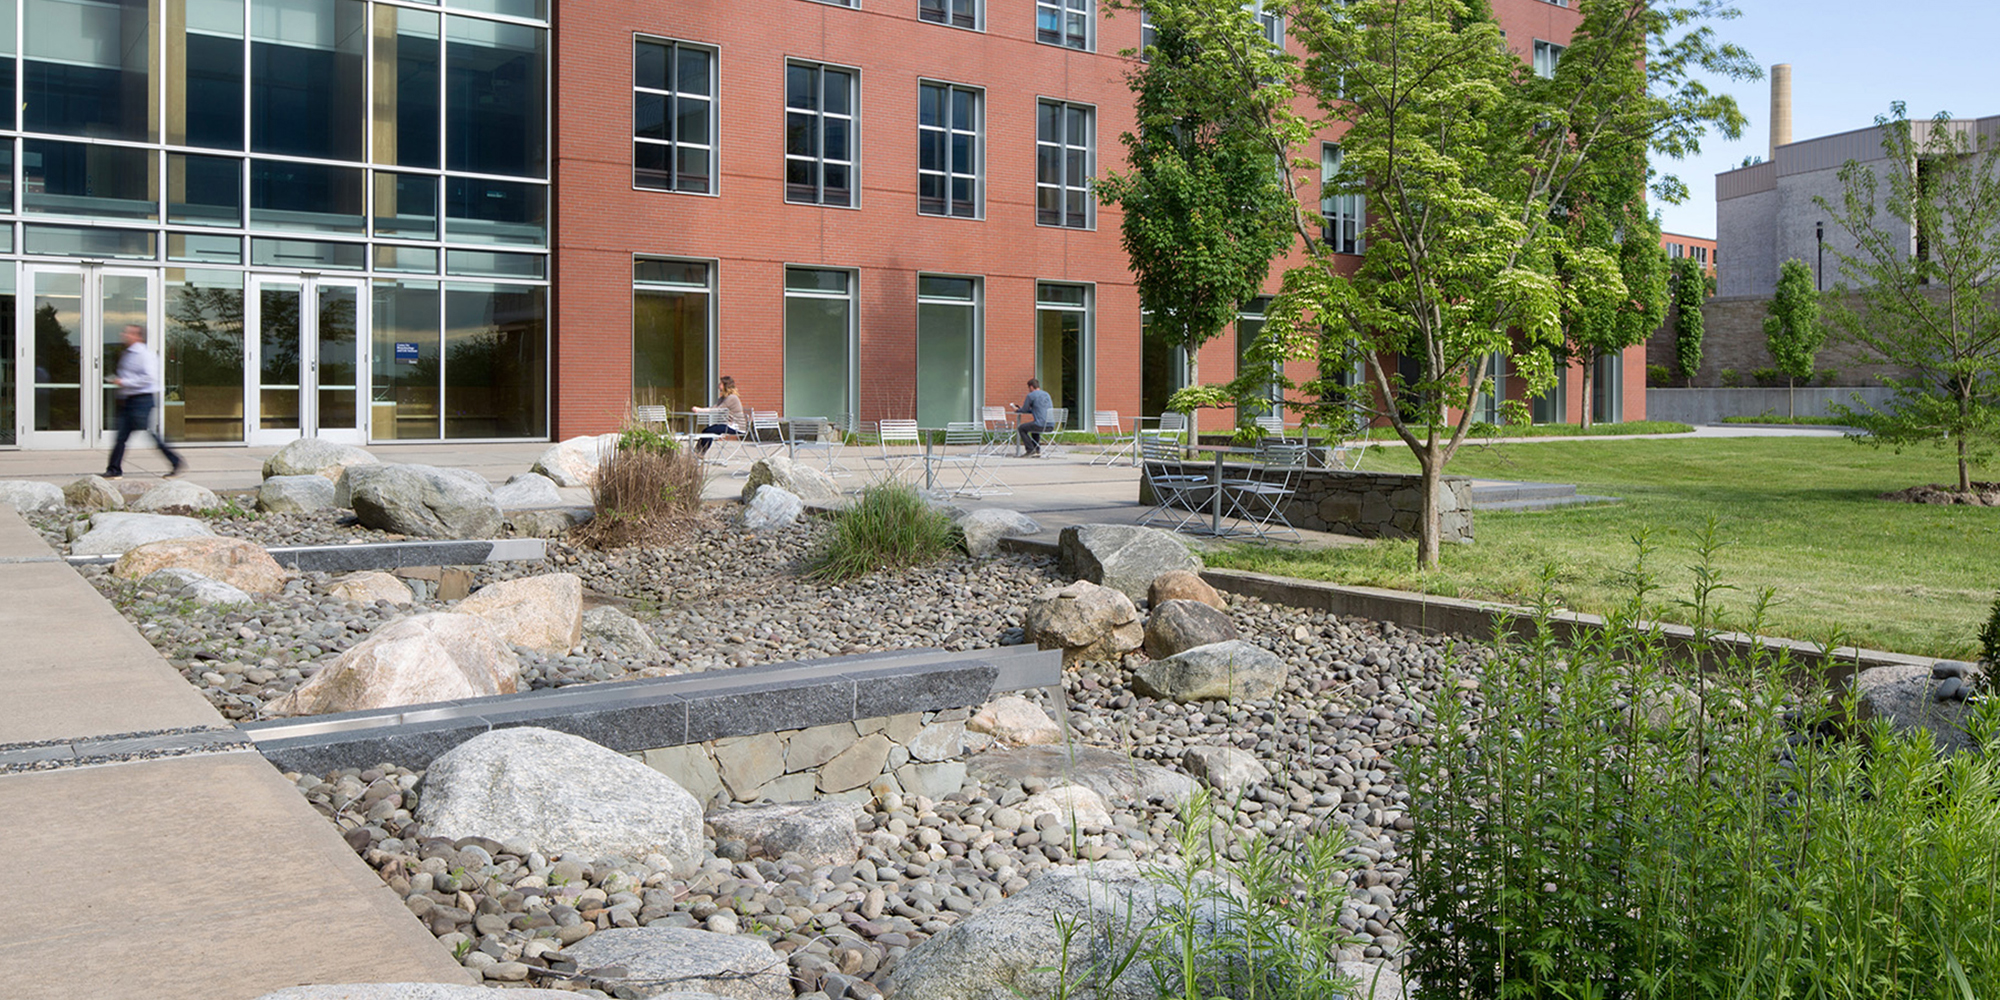 Landscape-based stormwater management system as part of the North District Plan at the University of Rhode Island (URI) campus